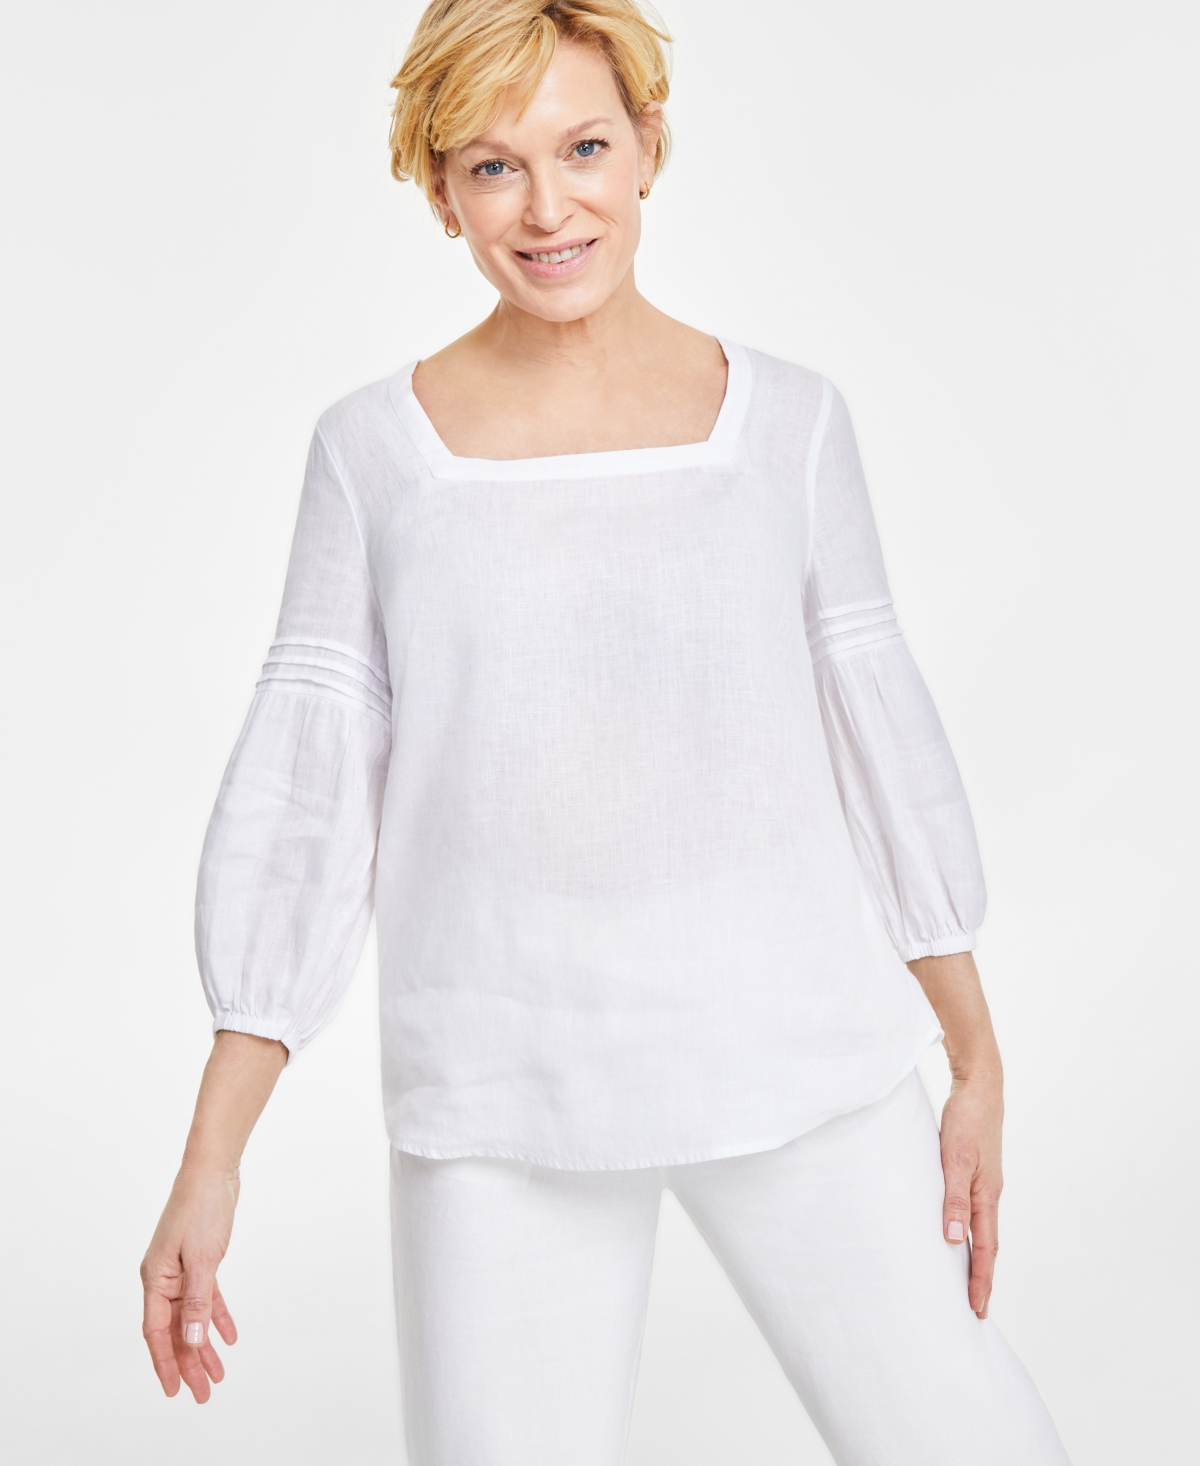 Women's 100% Linen Woven Square-Neck Top, Created for Macy's - Bright White